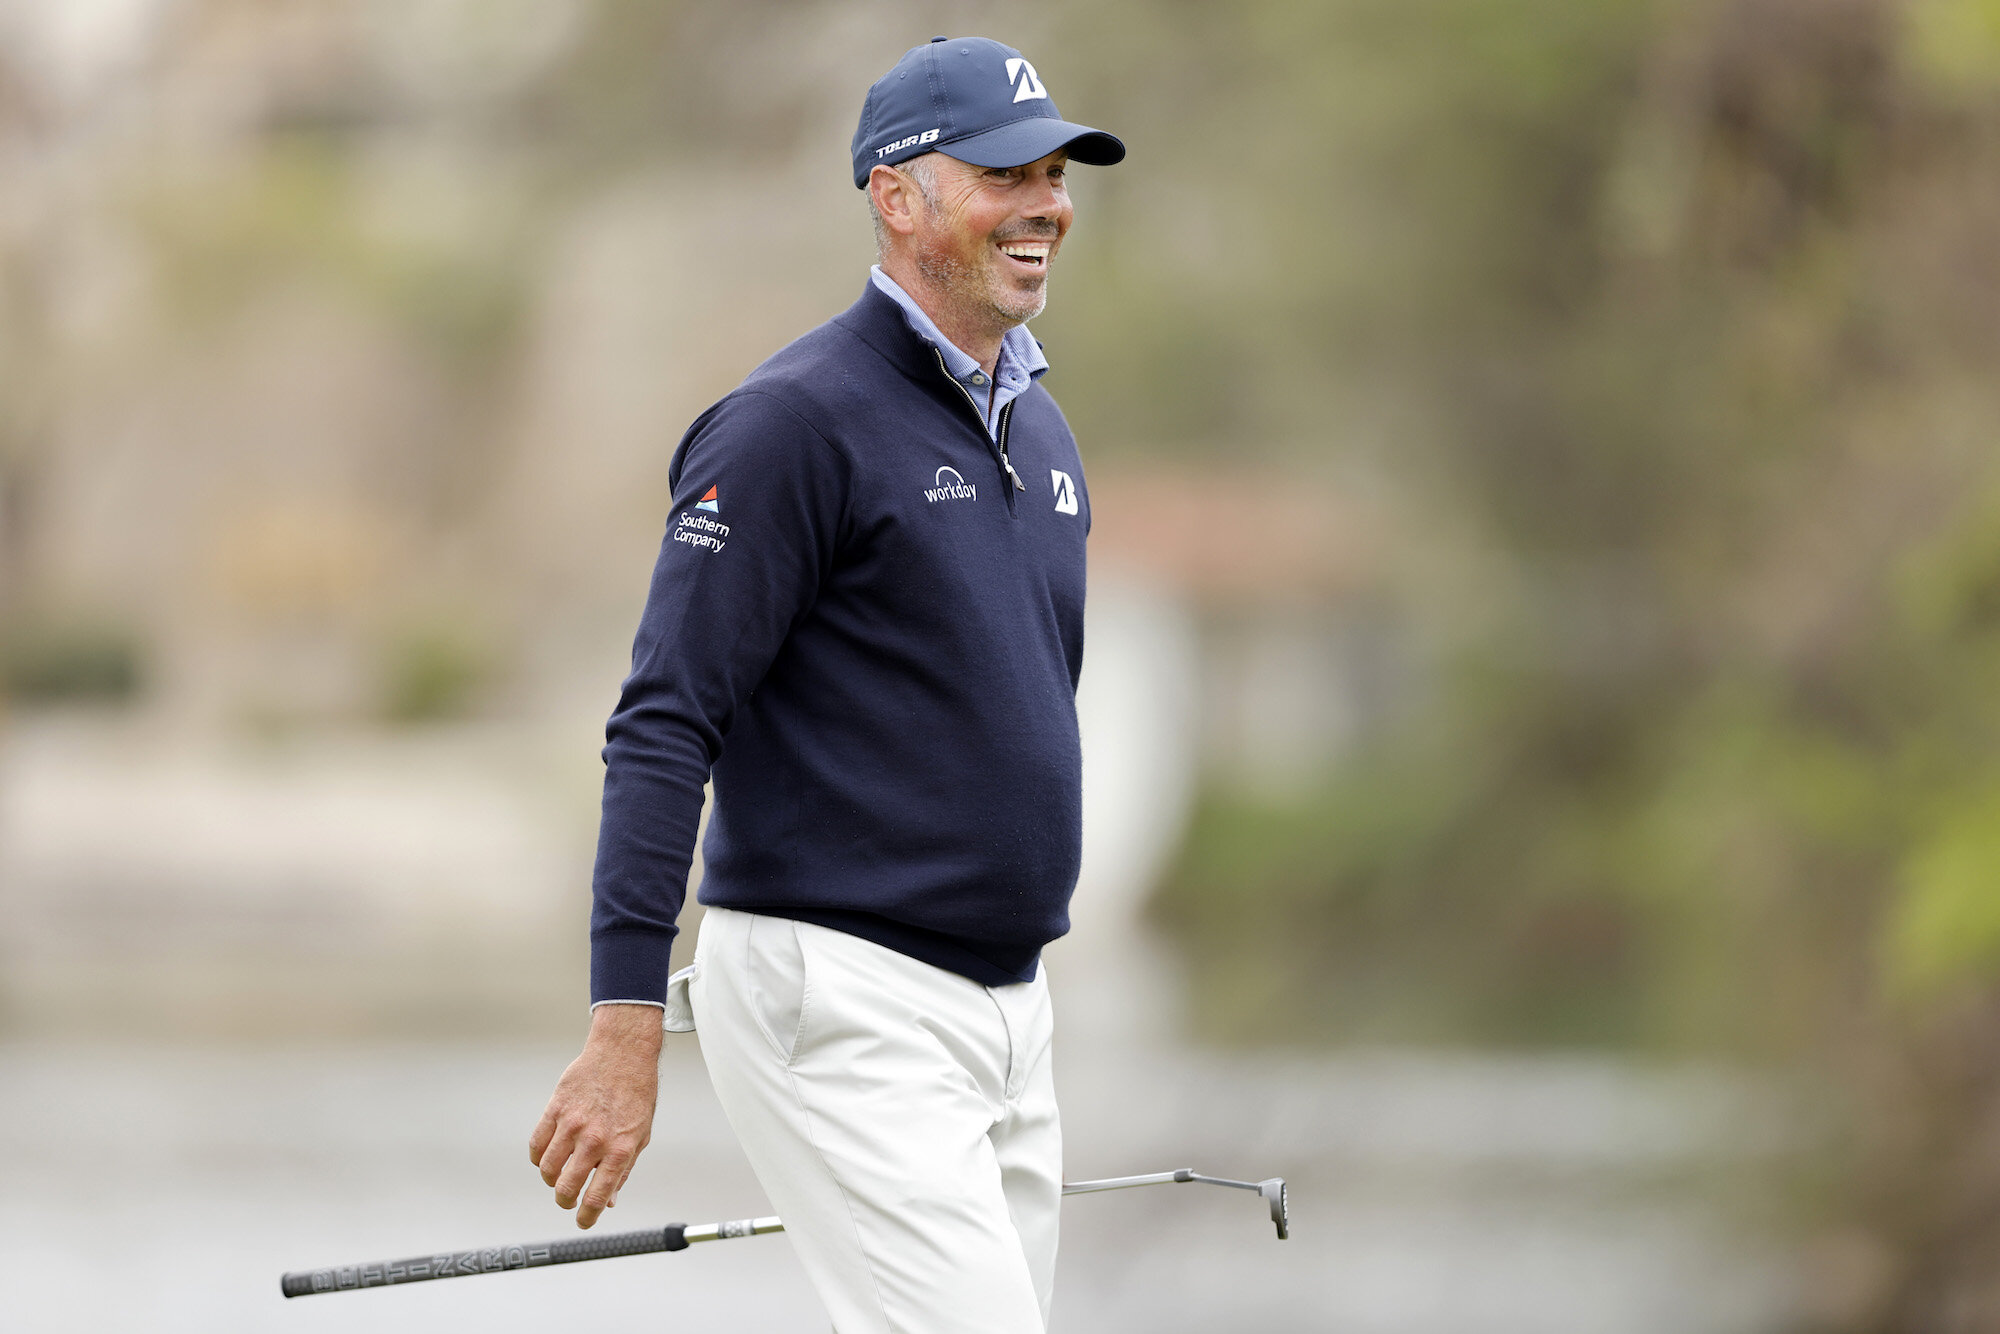  AUSTIN, TEXAS - MARCH 24: Matt Kuchar of the United States reacts on the 12th hole in his match against Justin Thomas of the United States during the first round of the World Golf Championships-Dell Technologies Match Play at Austin Country Club on 